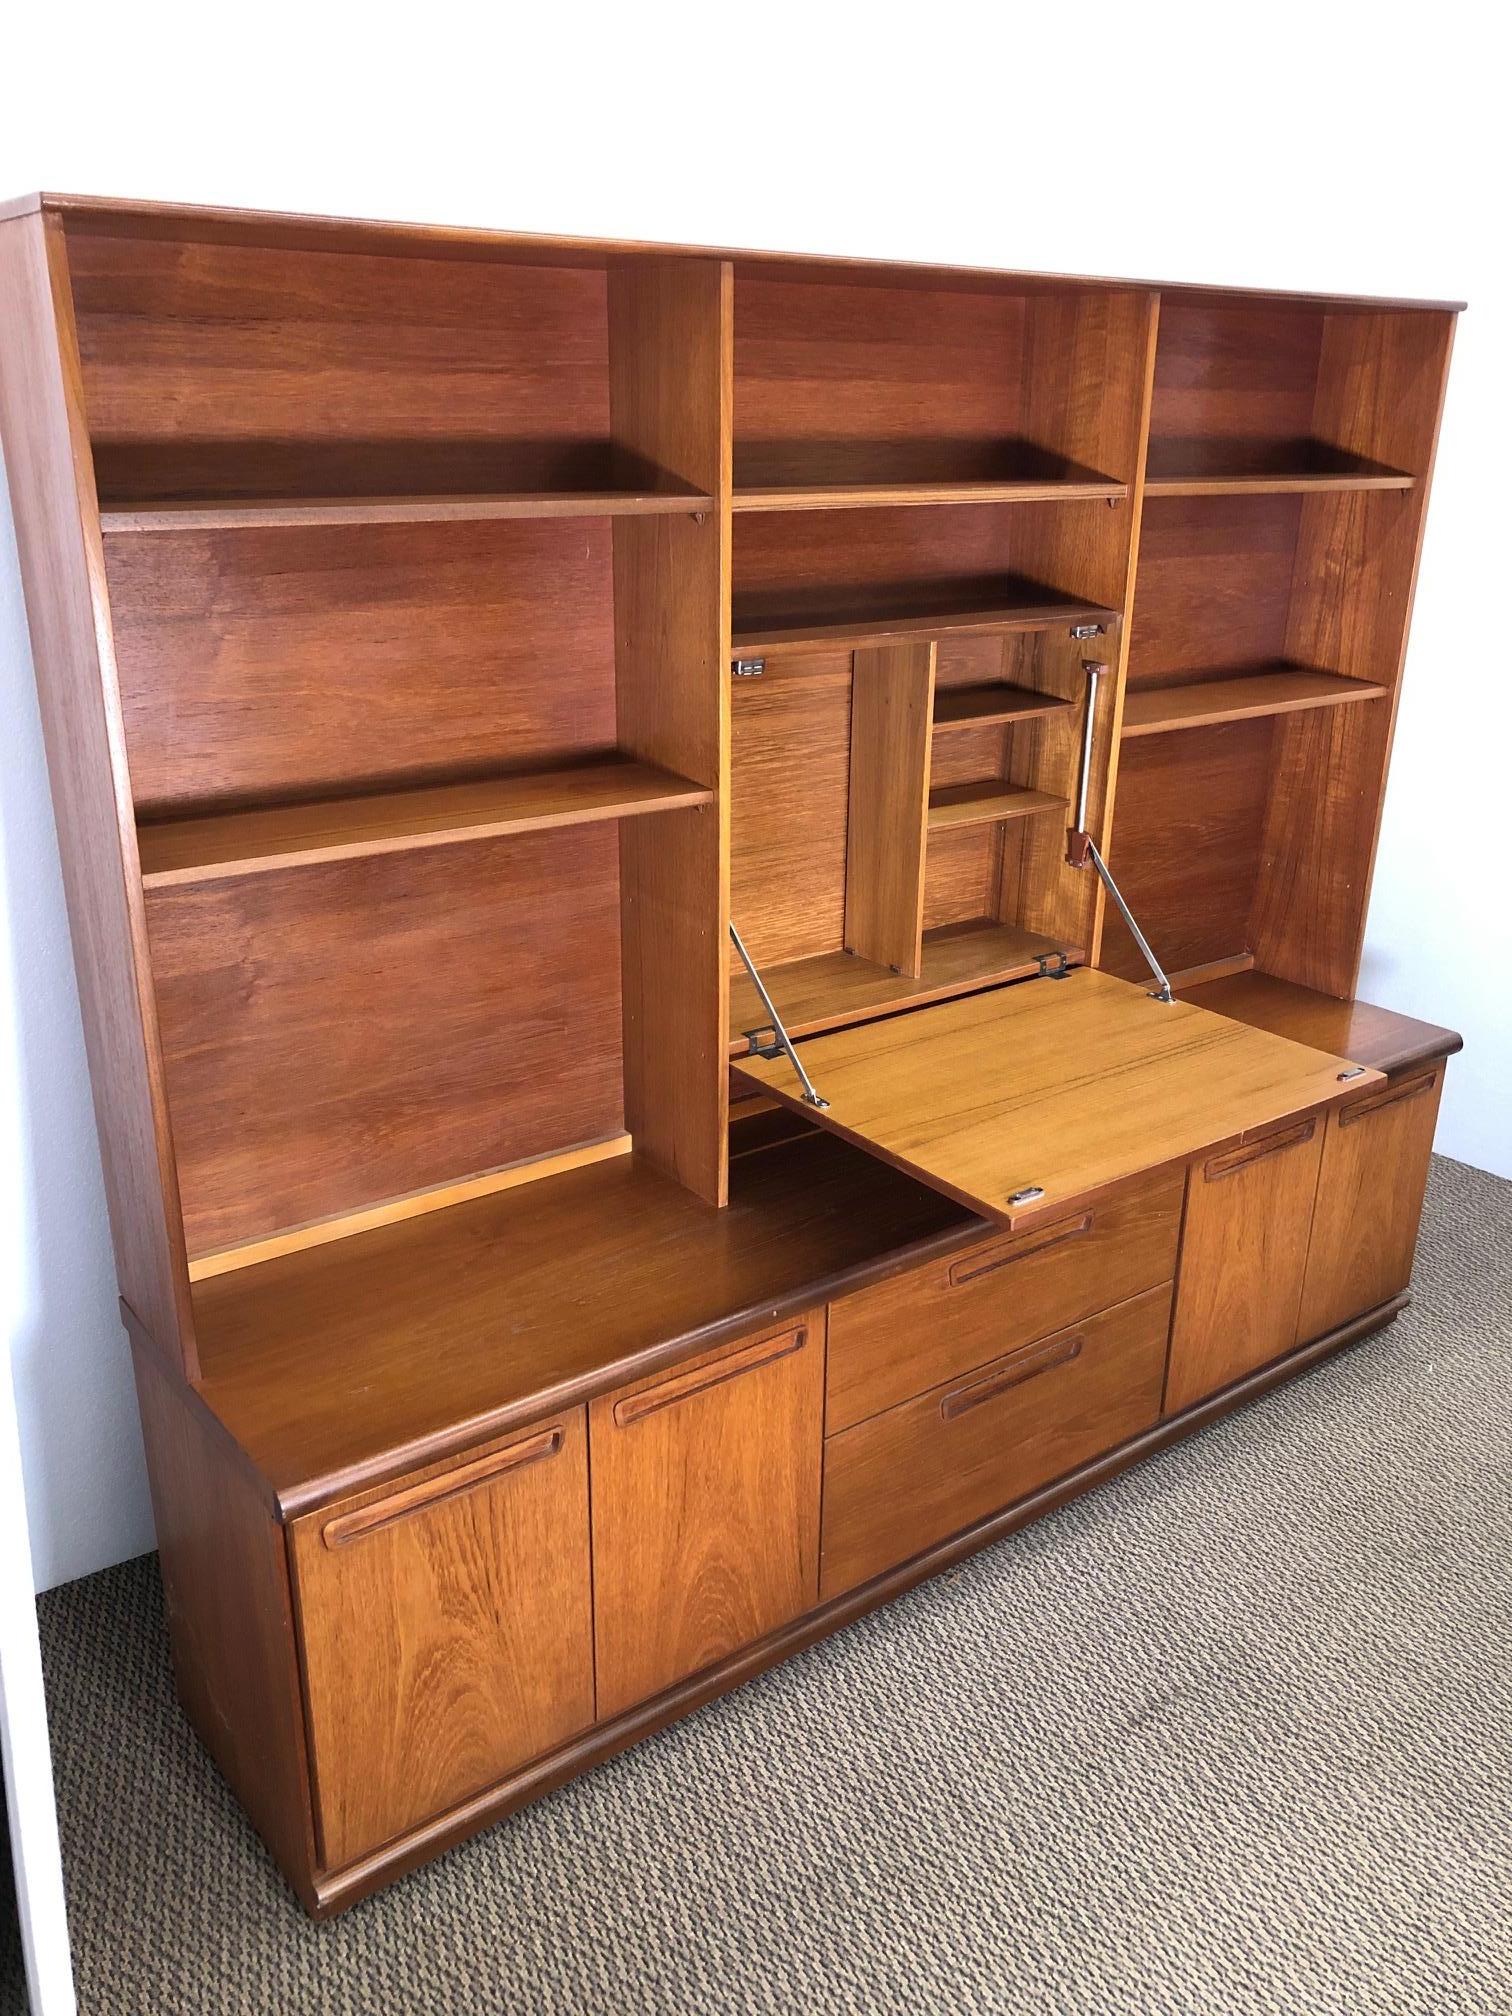 Fantastic teak wall unit by Meredew. Made in England. Original label in top drawer. Featuring a base with 2 drawers and 2 cabinets with adjustable shelves.
The top features a drop down desk and adjustable shelves on the left and the right. The top